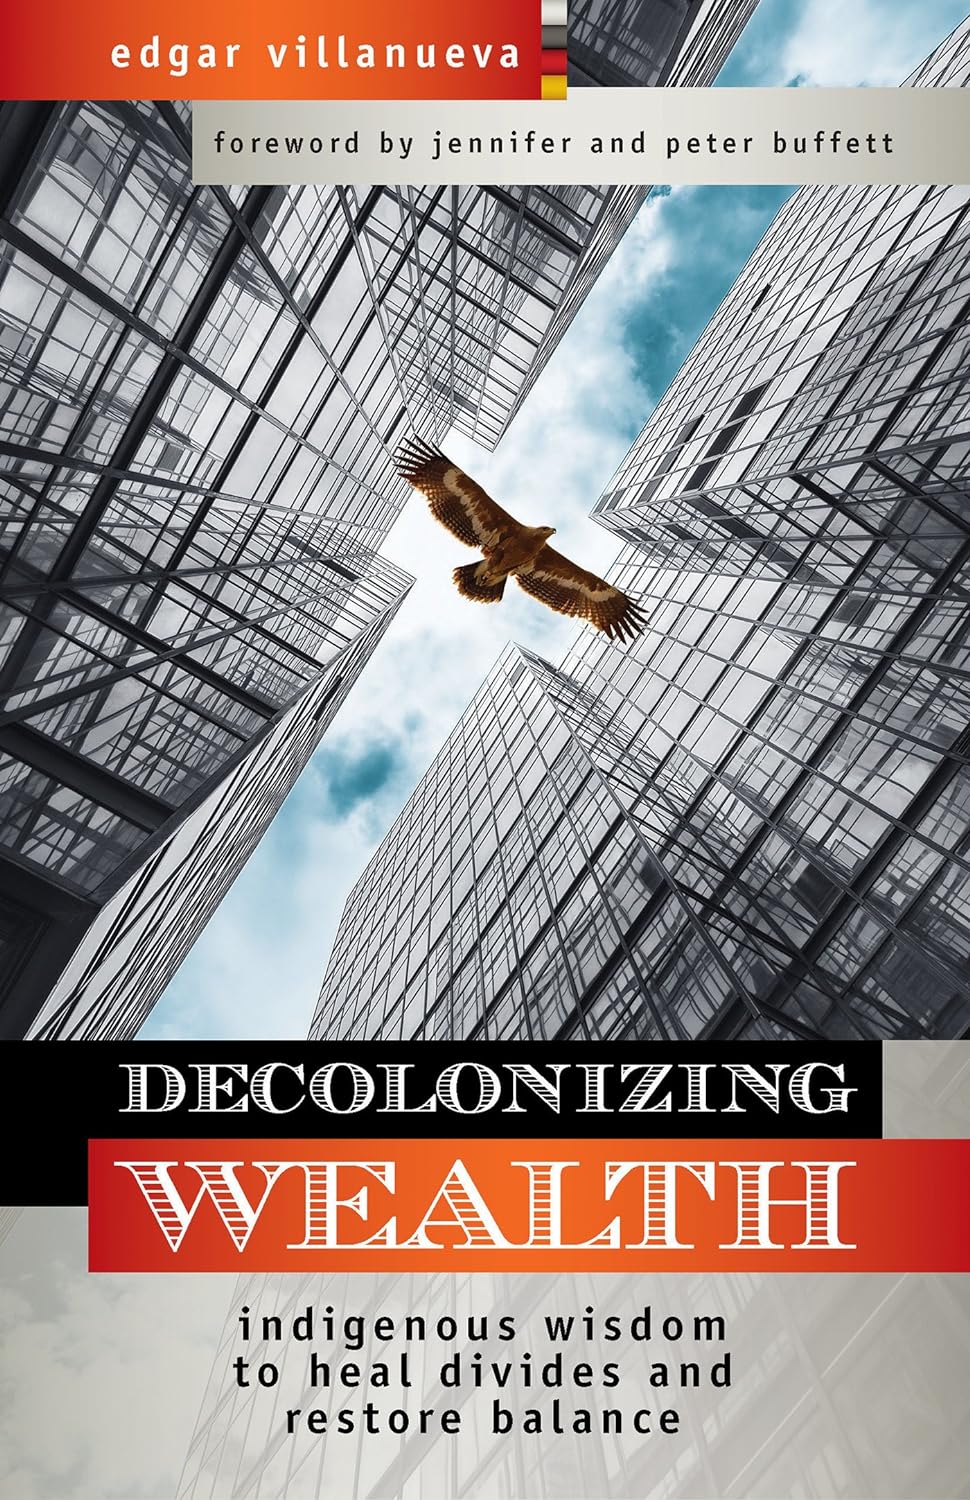 This image is the cover of the fundraising book Decolonizing Wealth: Indigenous Wisdom to Heal Divides and Restore Balance by Edgar Villanueva.